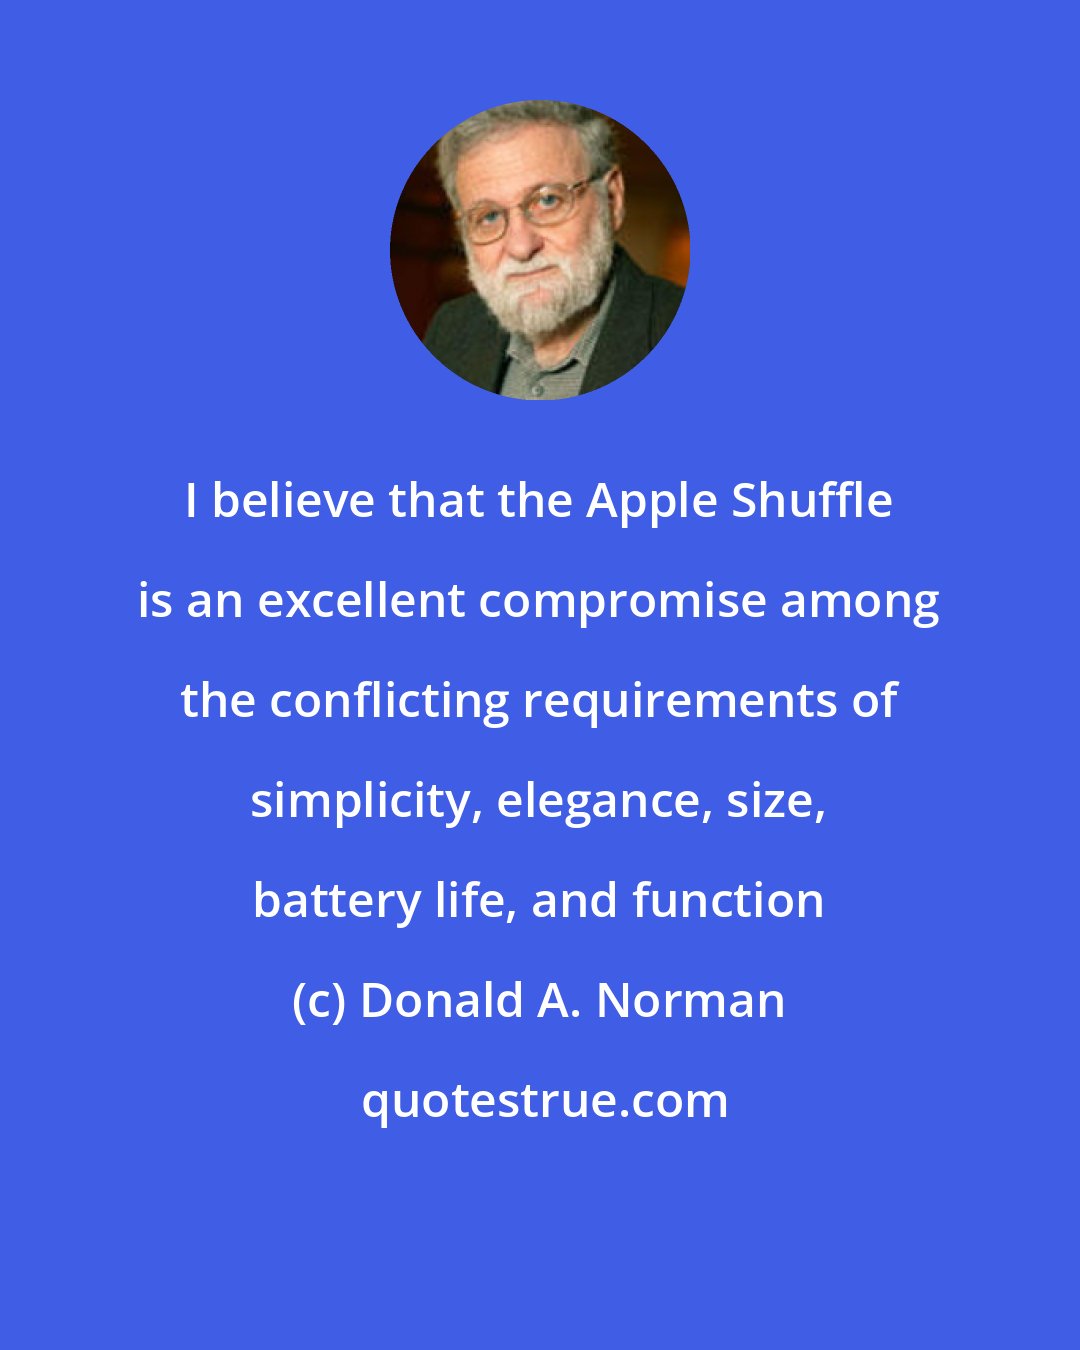 Donald A. Norman: I believe that the Apple Shuffle is an excellent compromise among the conflicting requirements of simplicity, elegance, size, battery life, and function